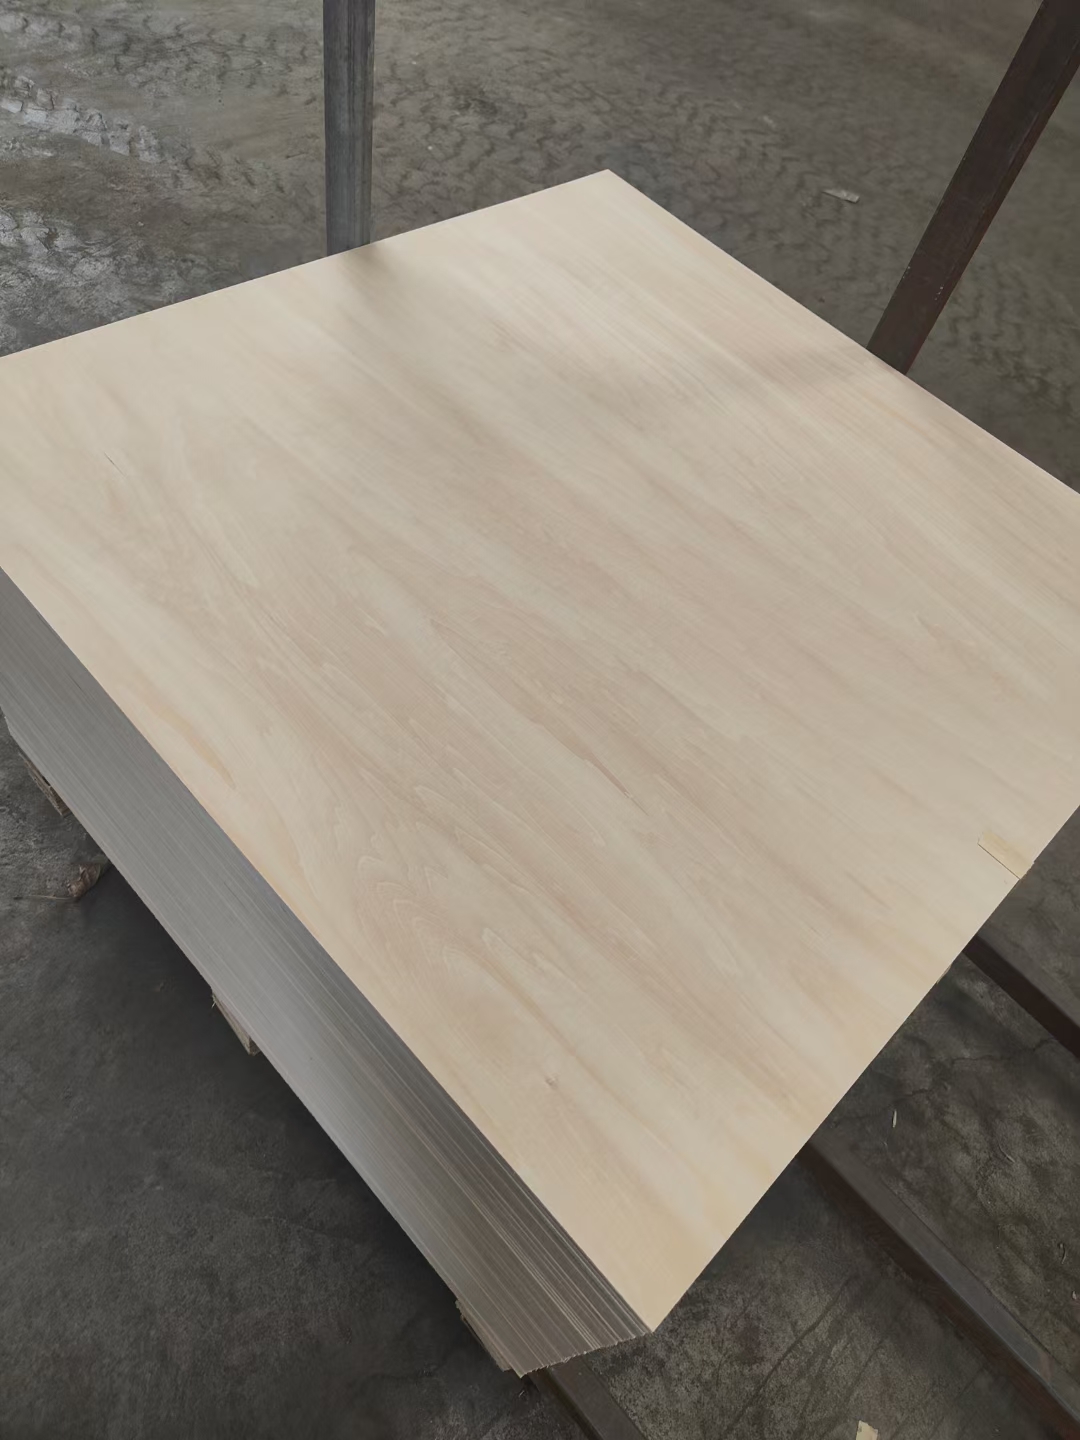 New product-Basswood plywood for laser cutting toys and craft(图4)